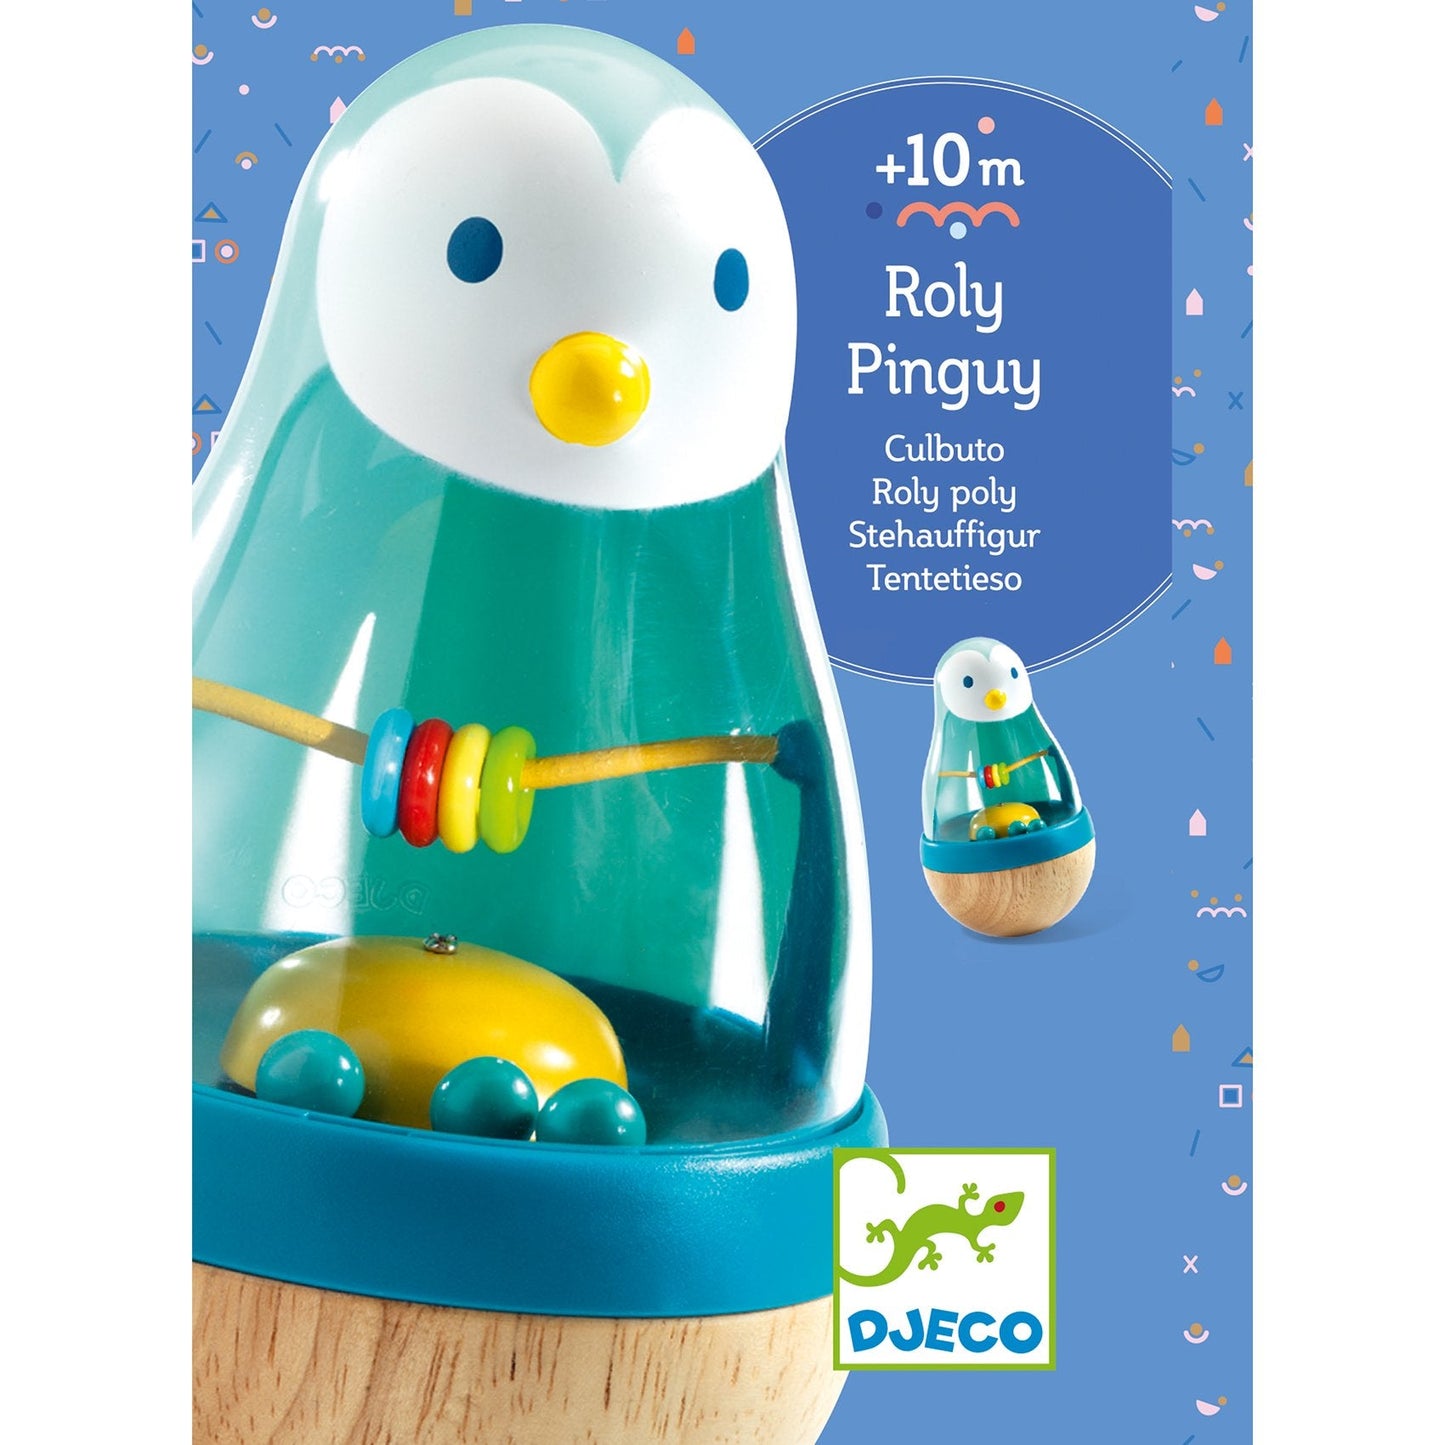 Djeco Roly Pingui Roly Poly Penguin Toy